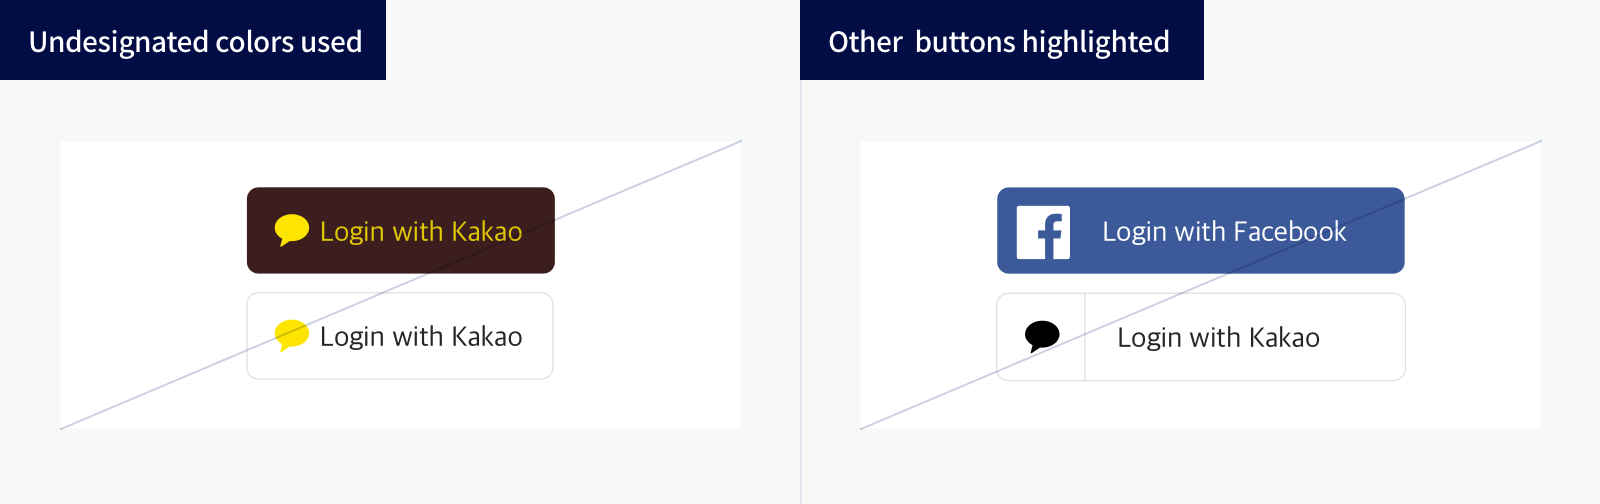 Bad example of buttons that use wrong colors